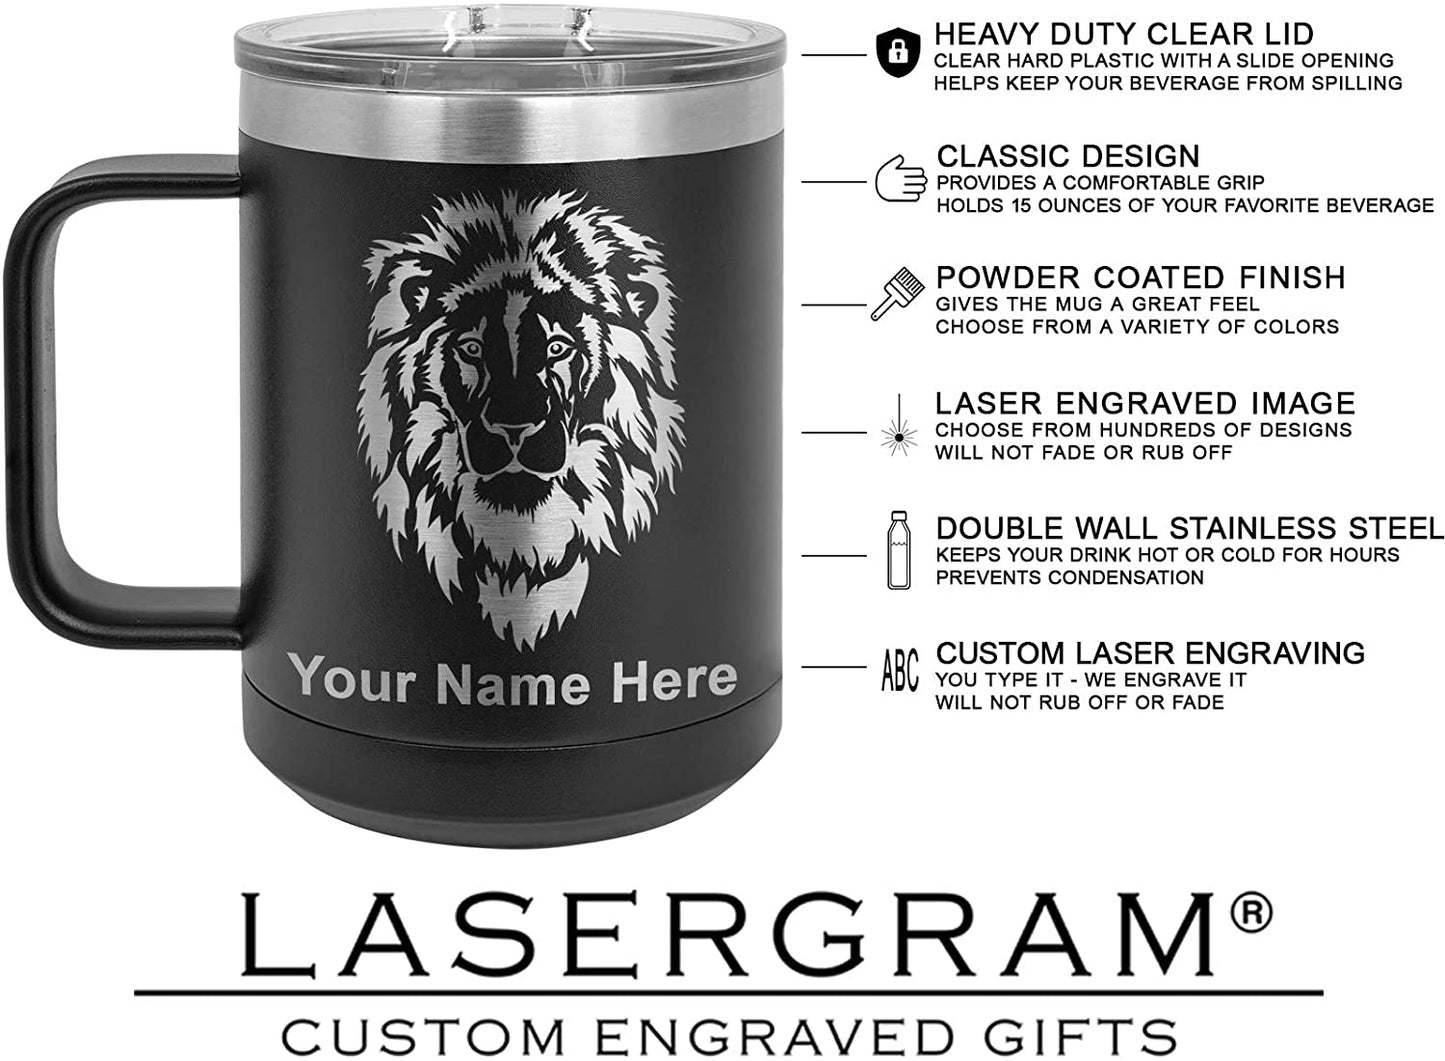 15oz Vacuum Insulated Coffee Mug, Dancer, Personalized Engraving Included